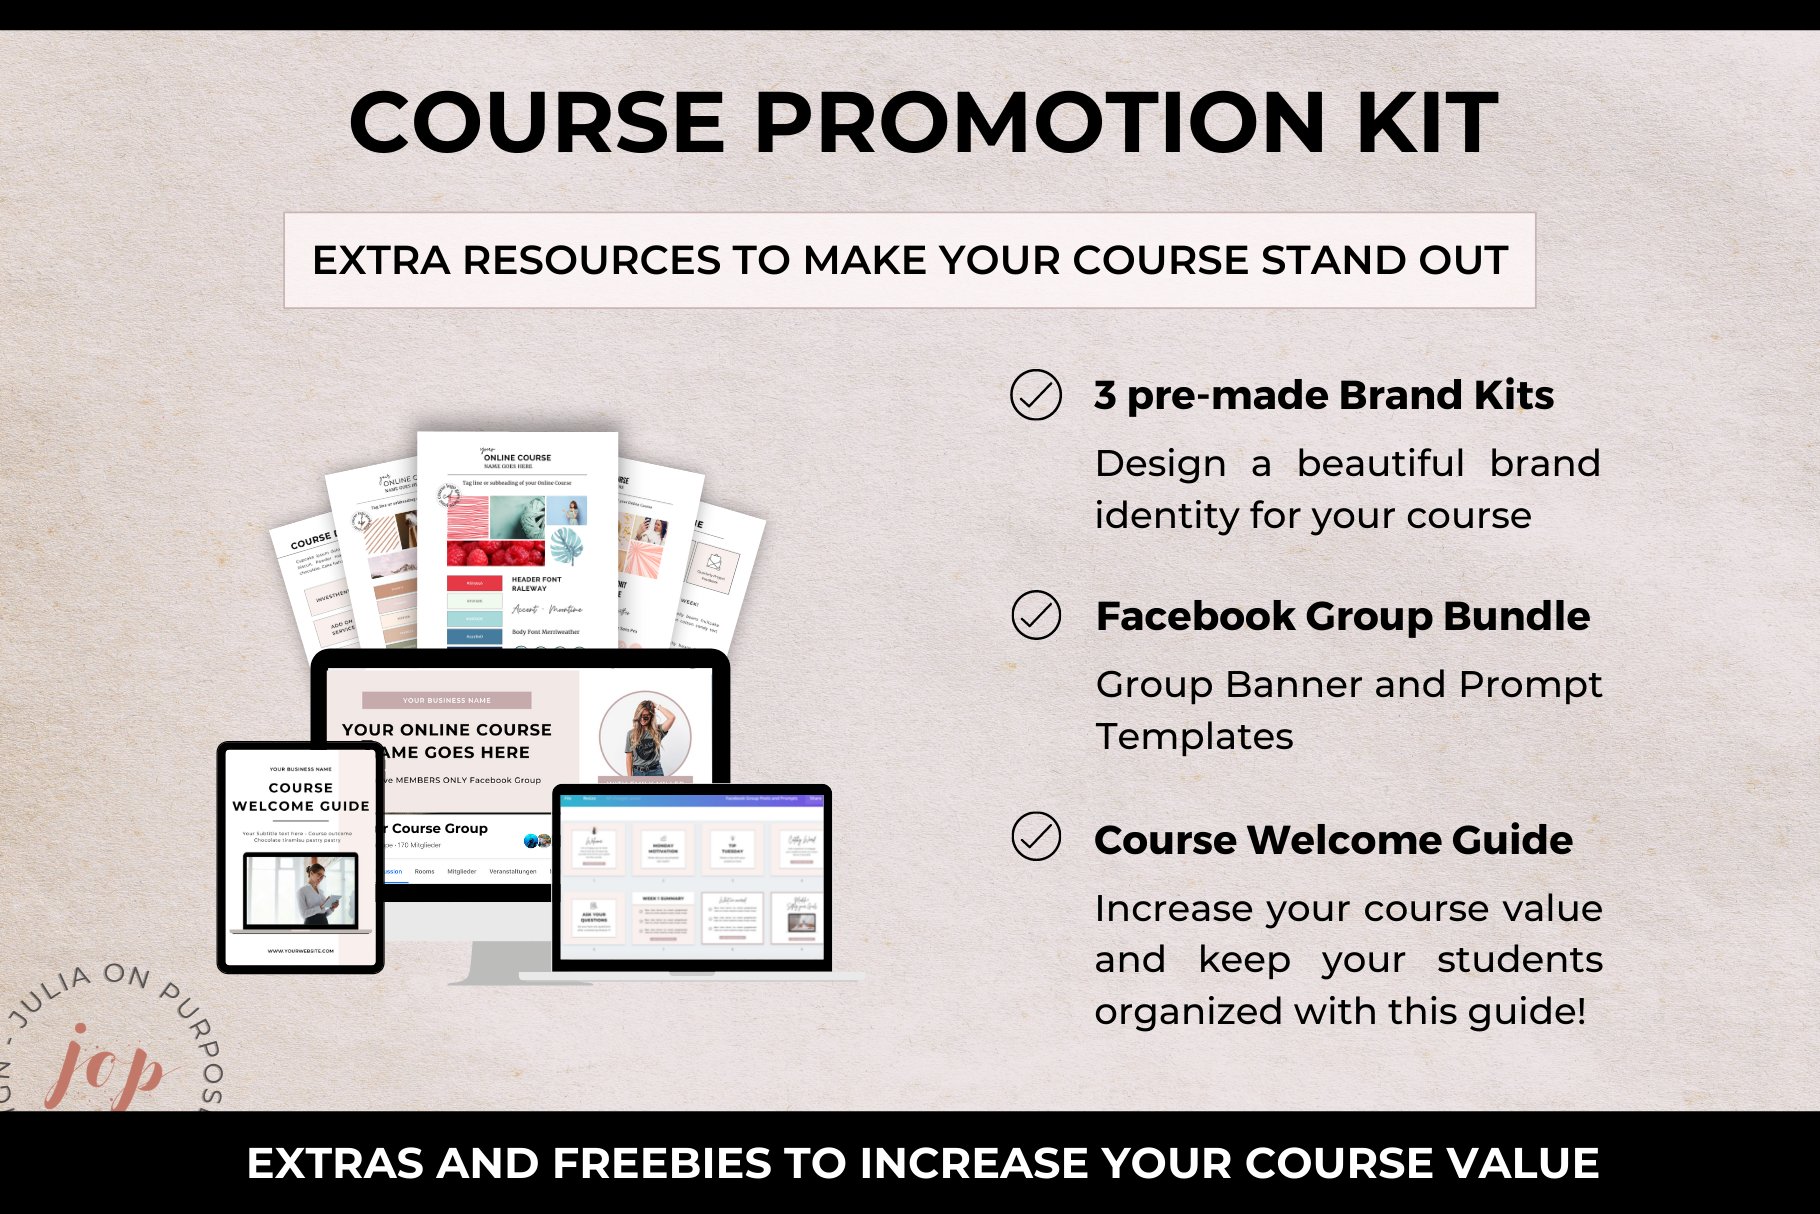 Use extra resources to make your course stand out.